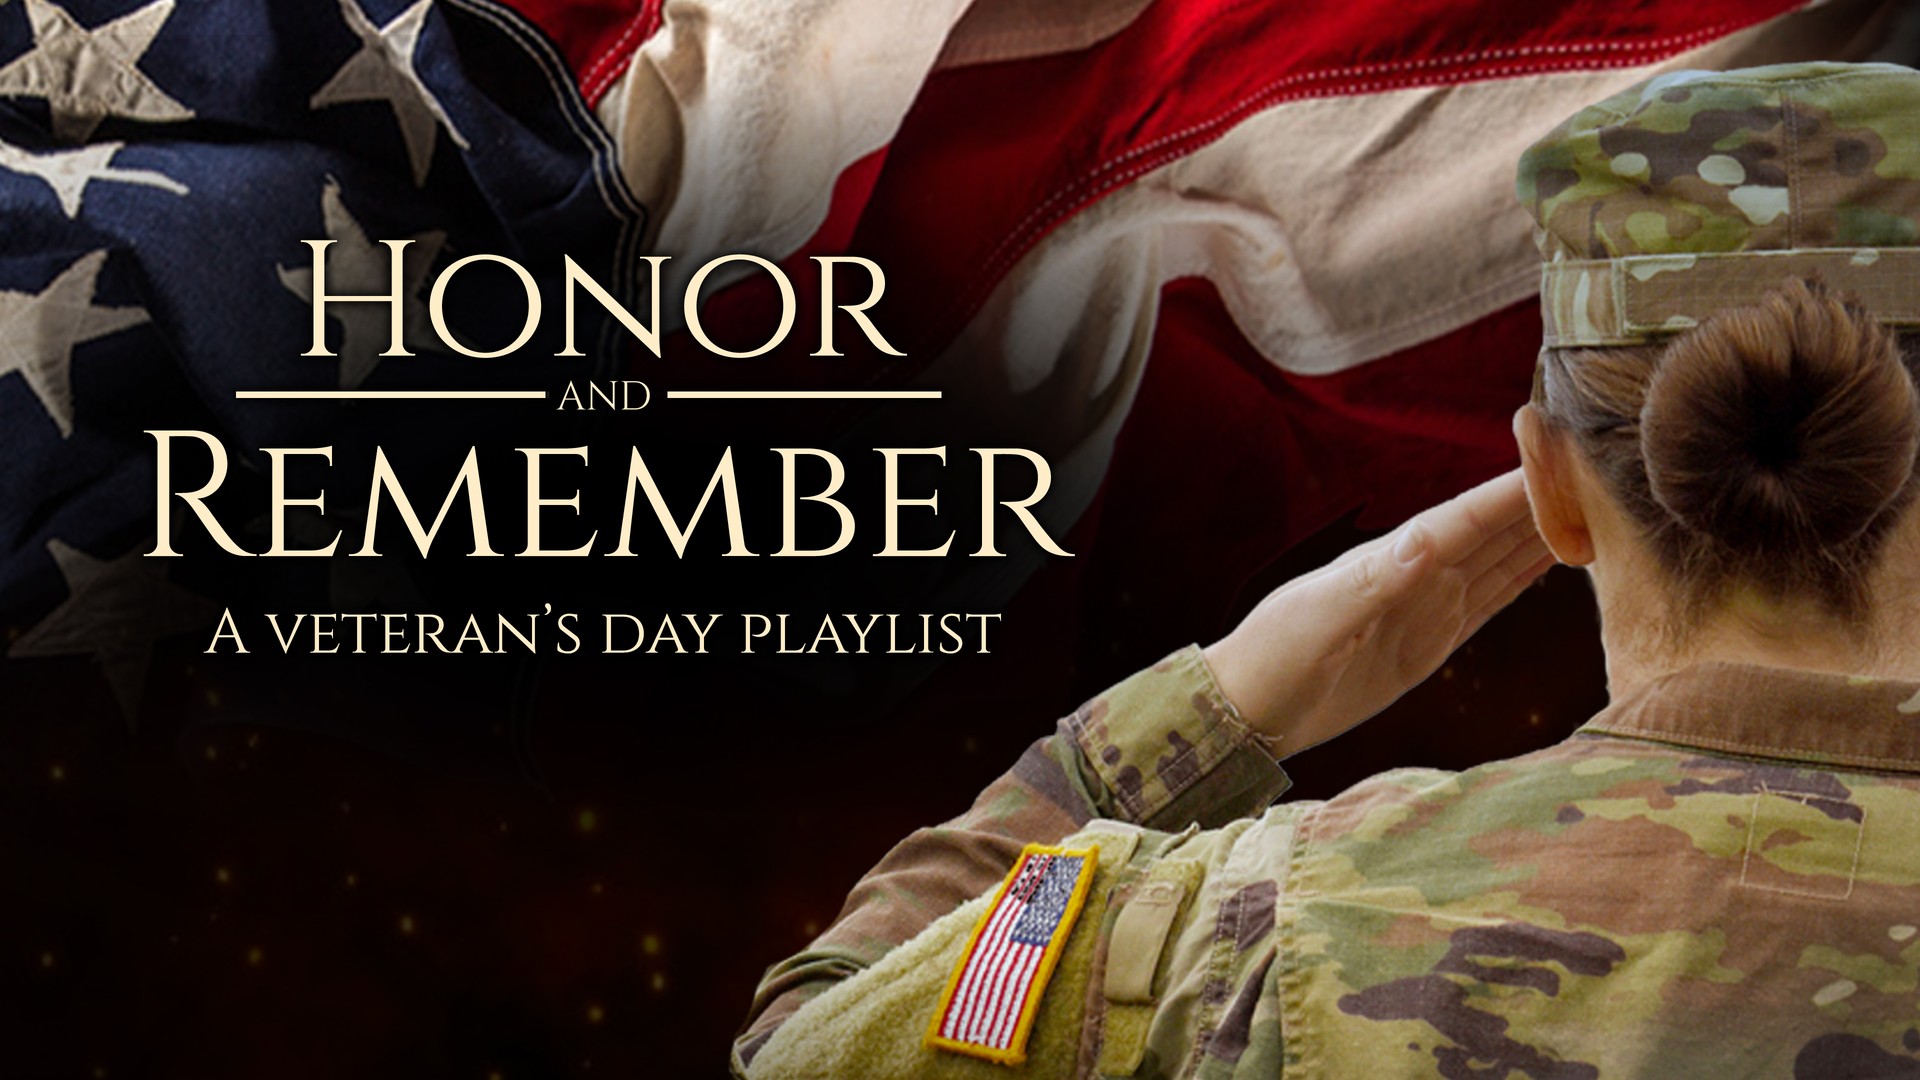 Honor and Remember: A Veteran's Day Playlist